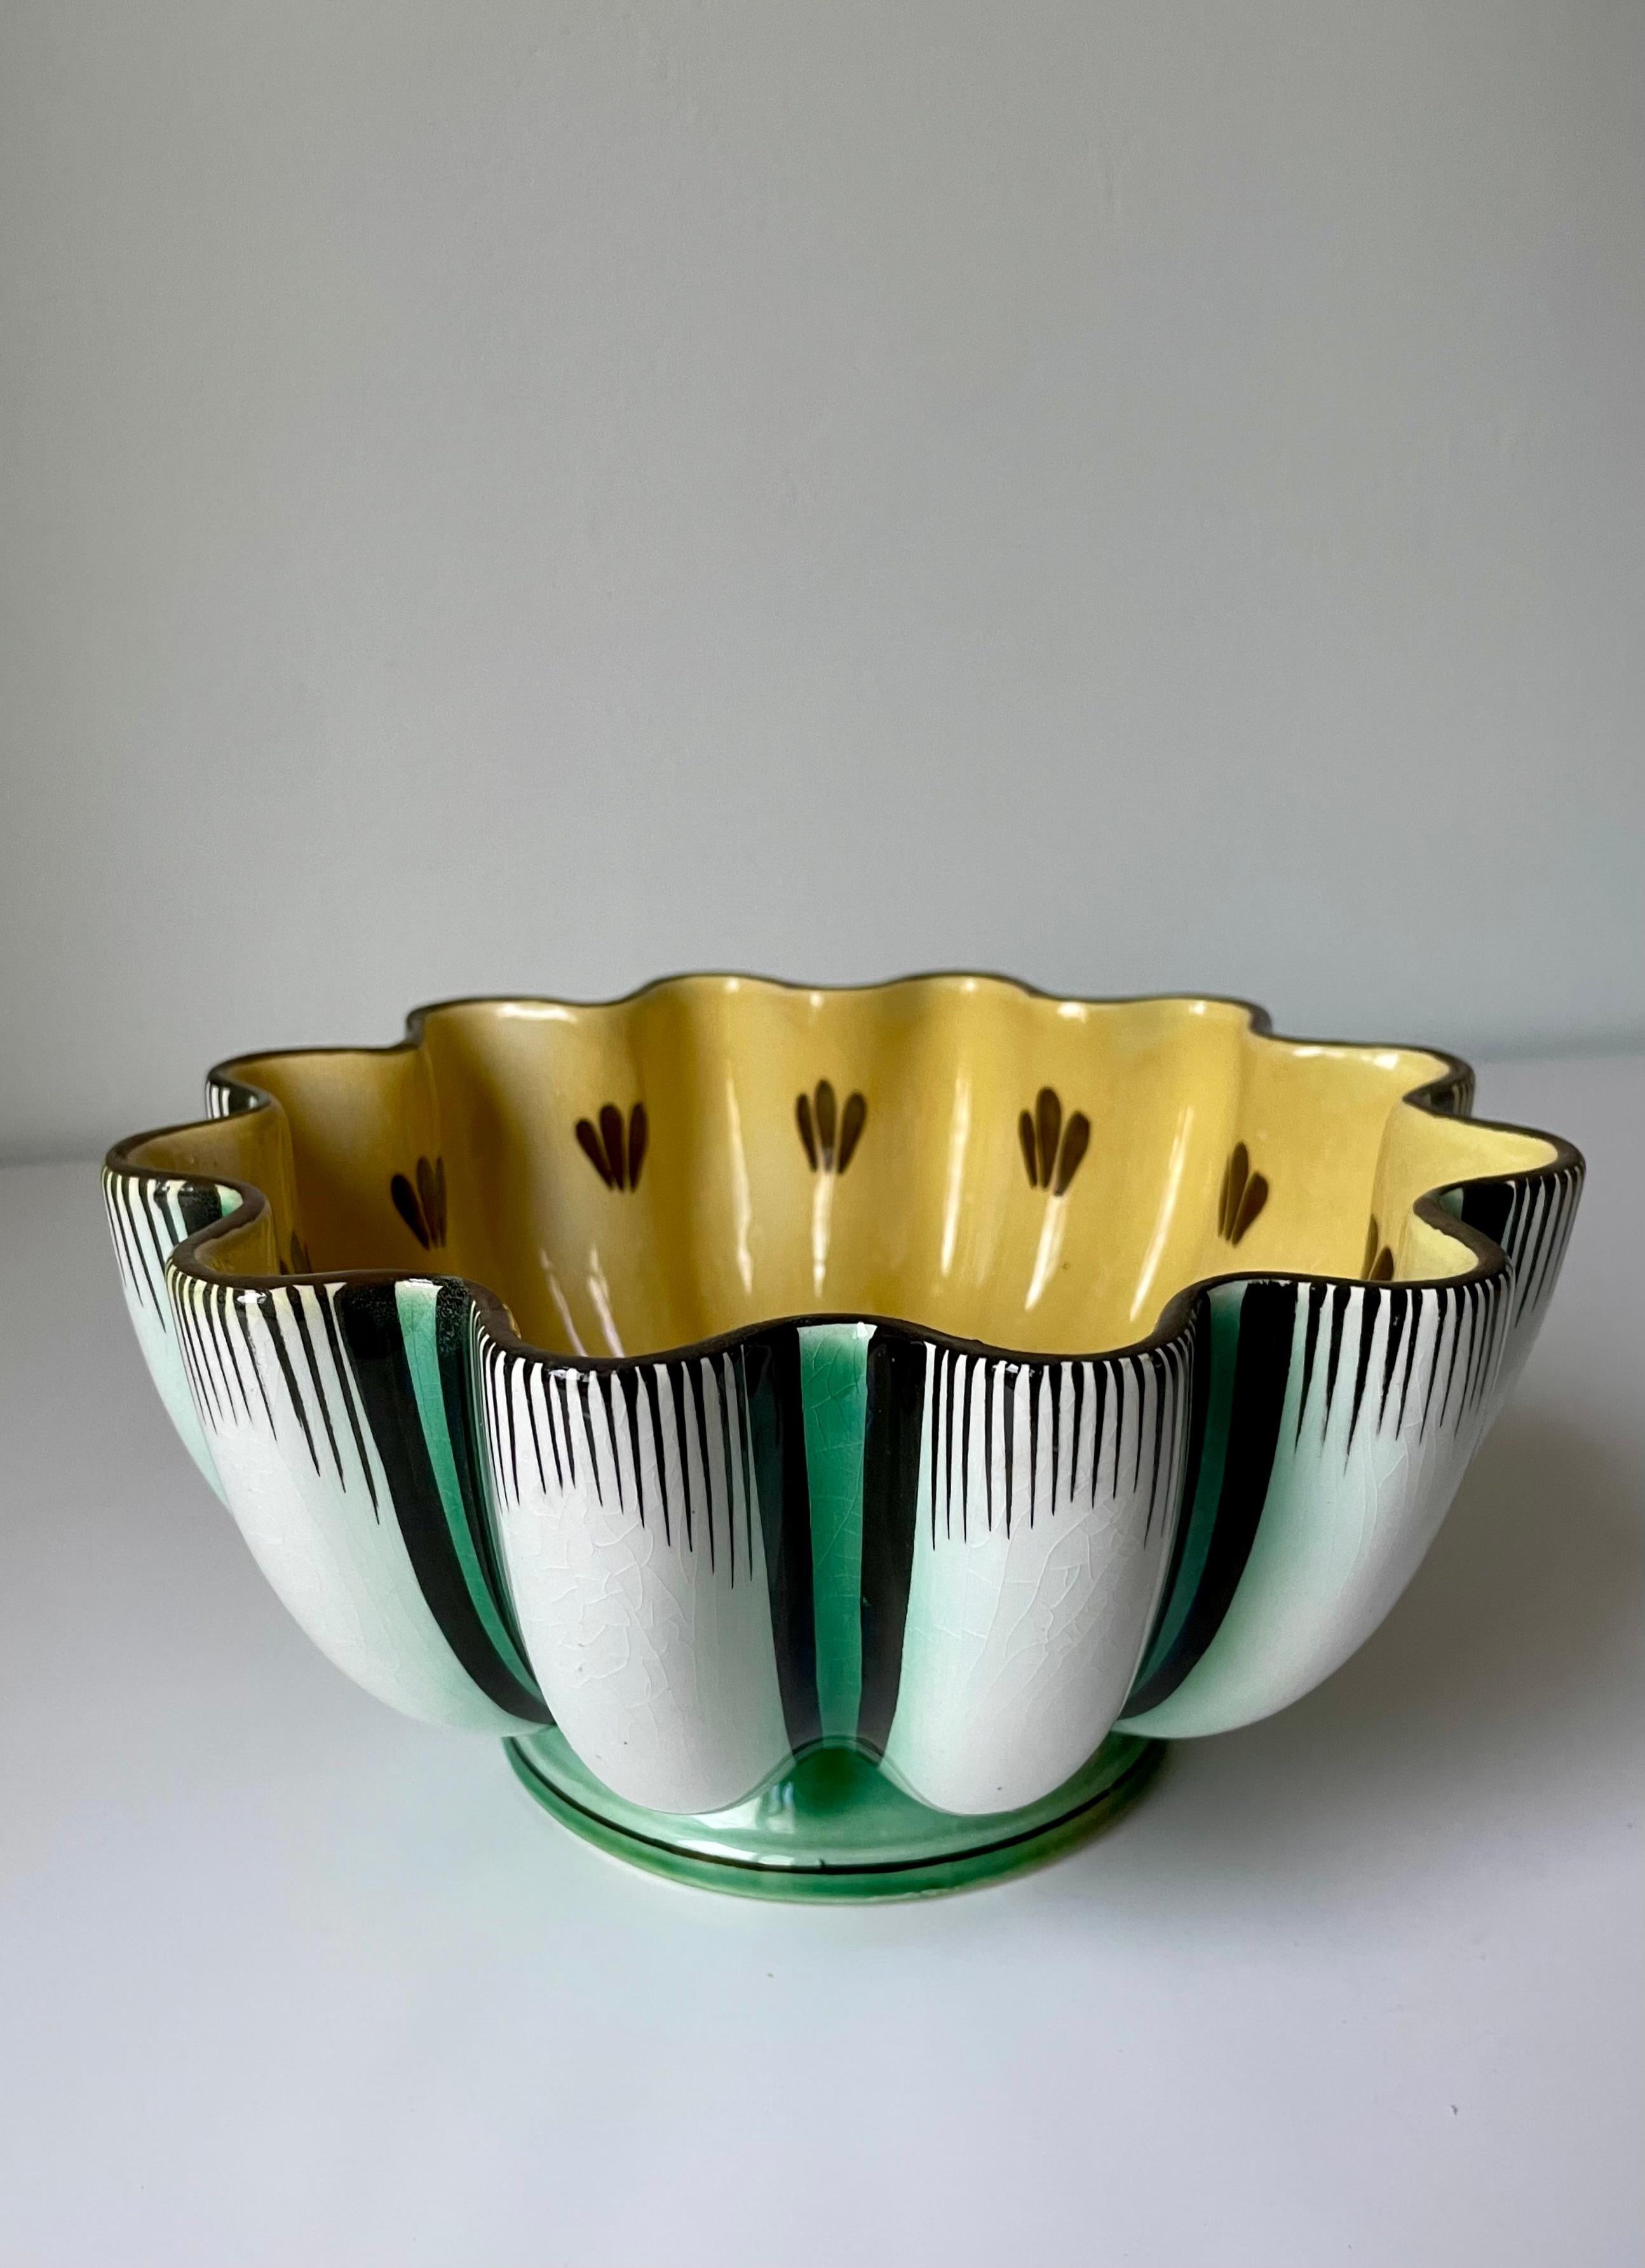 Swedish art deco bowl with wavy edge designed by Arthur Percy and hand-decorated by Eugen Trost for Gefle in the late 1920s-early 1930s. Hand-painted geometric, stylized, lined decor in white, green, black, yellow and caramel brown colored glaze.